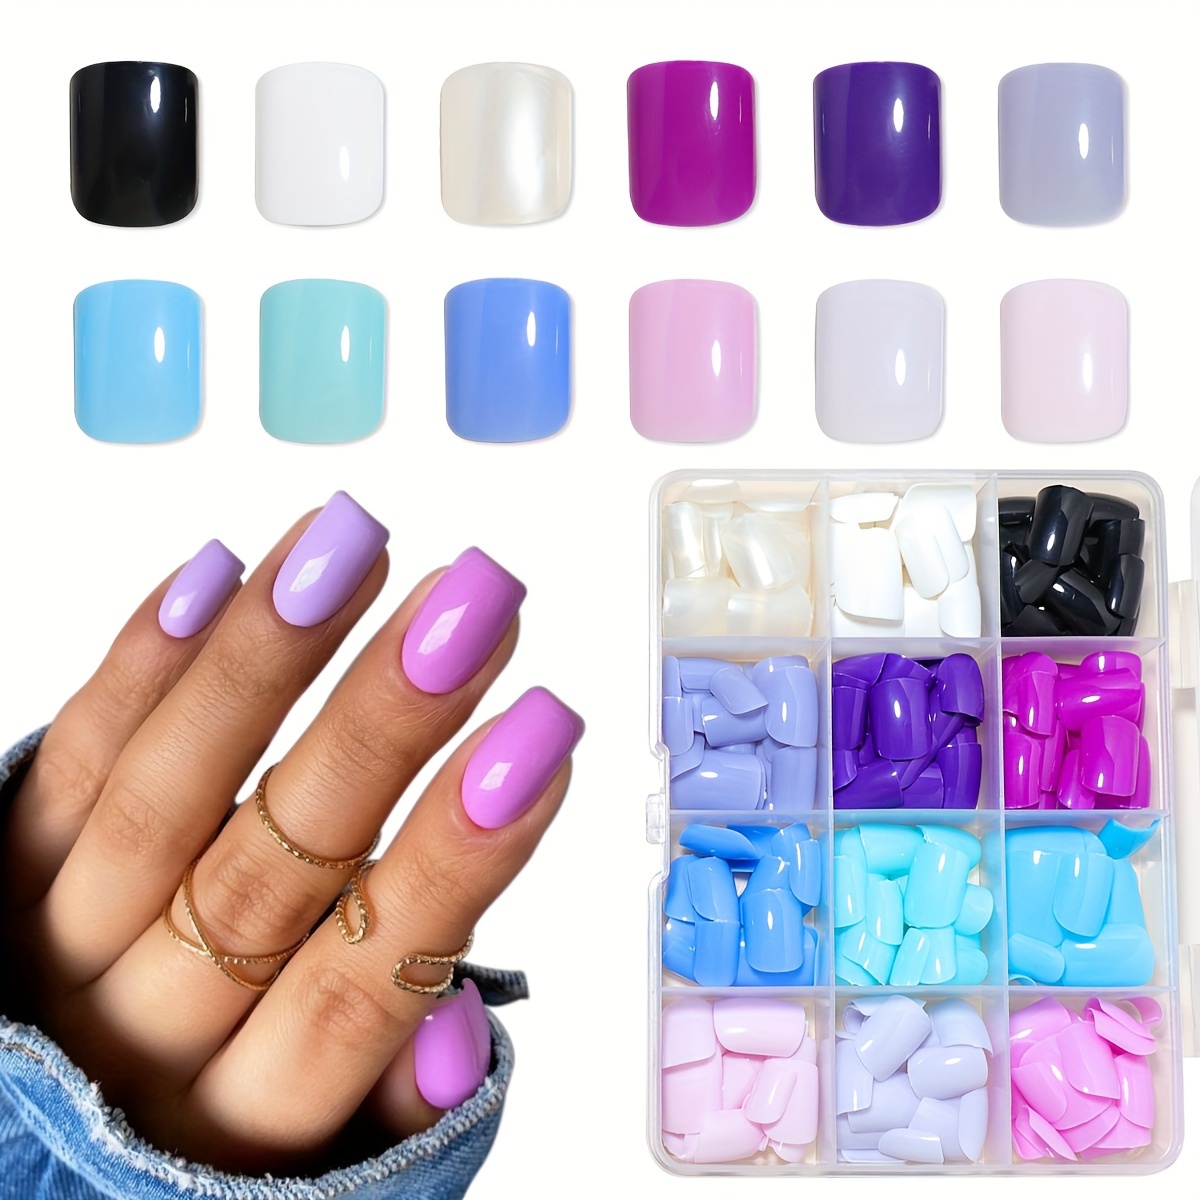 

False Nails Tips Set, 12 Color Assorted Square Acrylic Nail Art Pieces With Glossy Finish, Pre-shaped Full Cover Short Fake Nails In Storage Box For Diy Salon Style Manicure